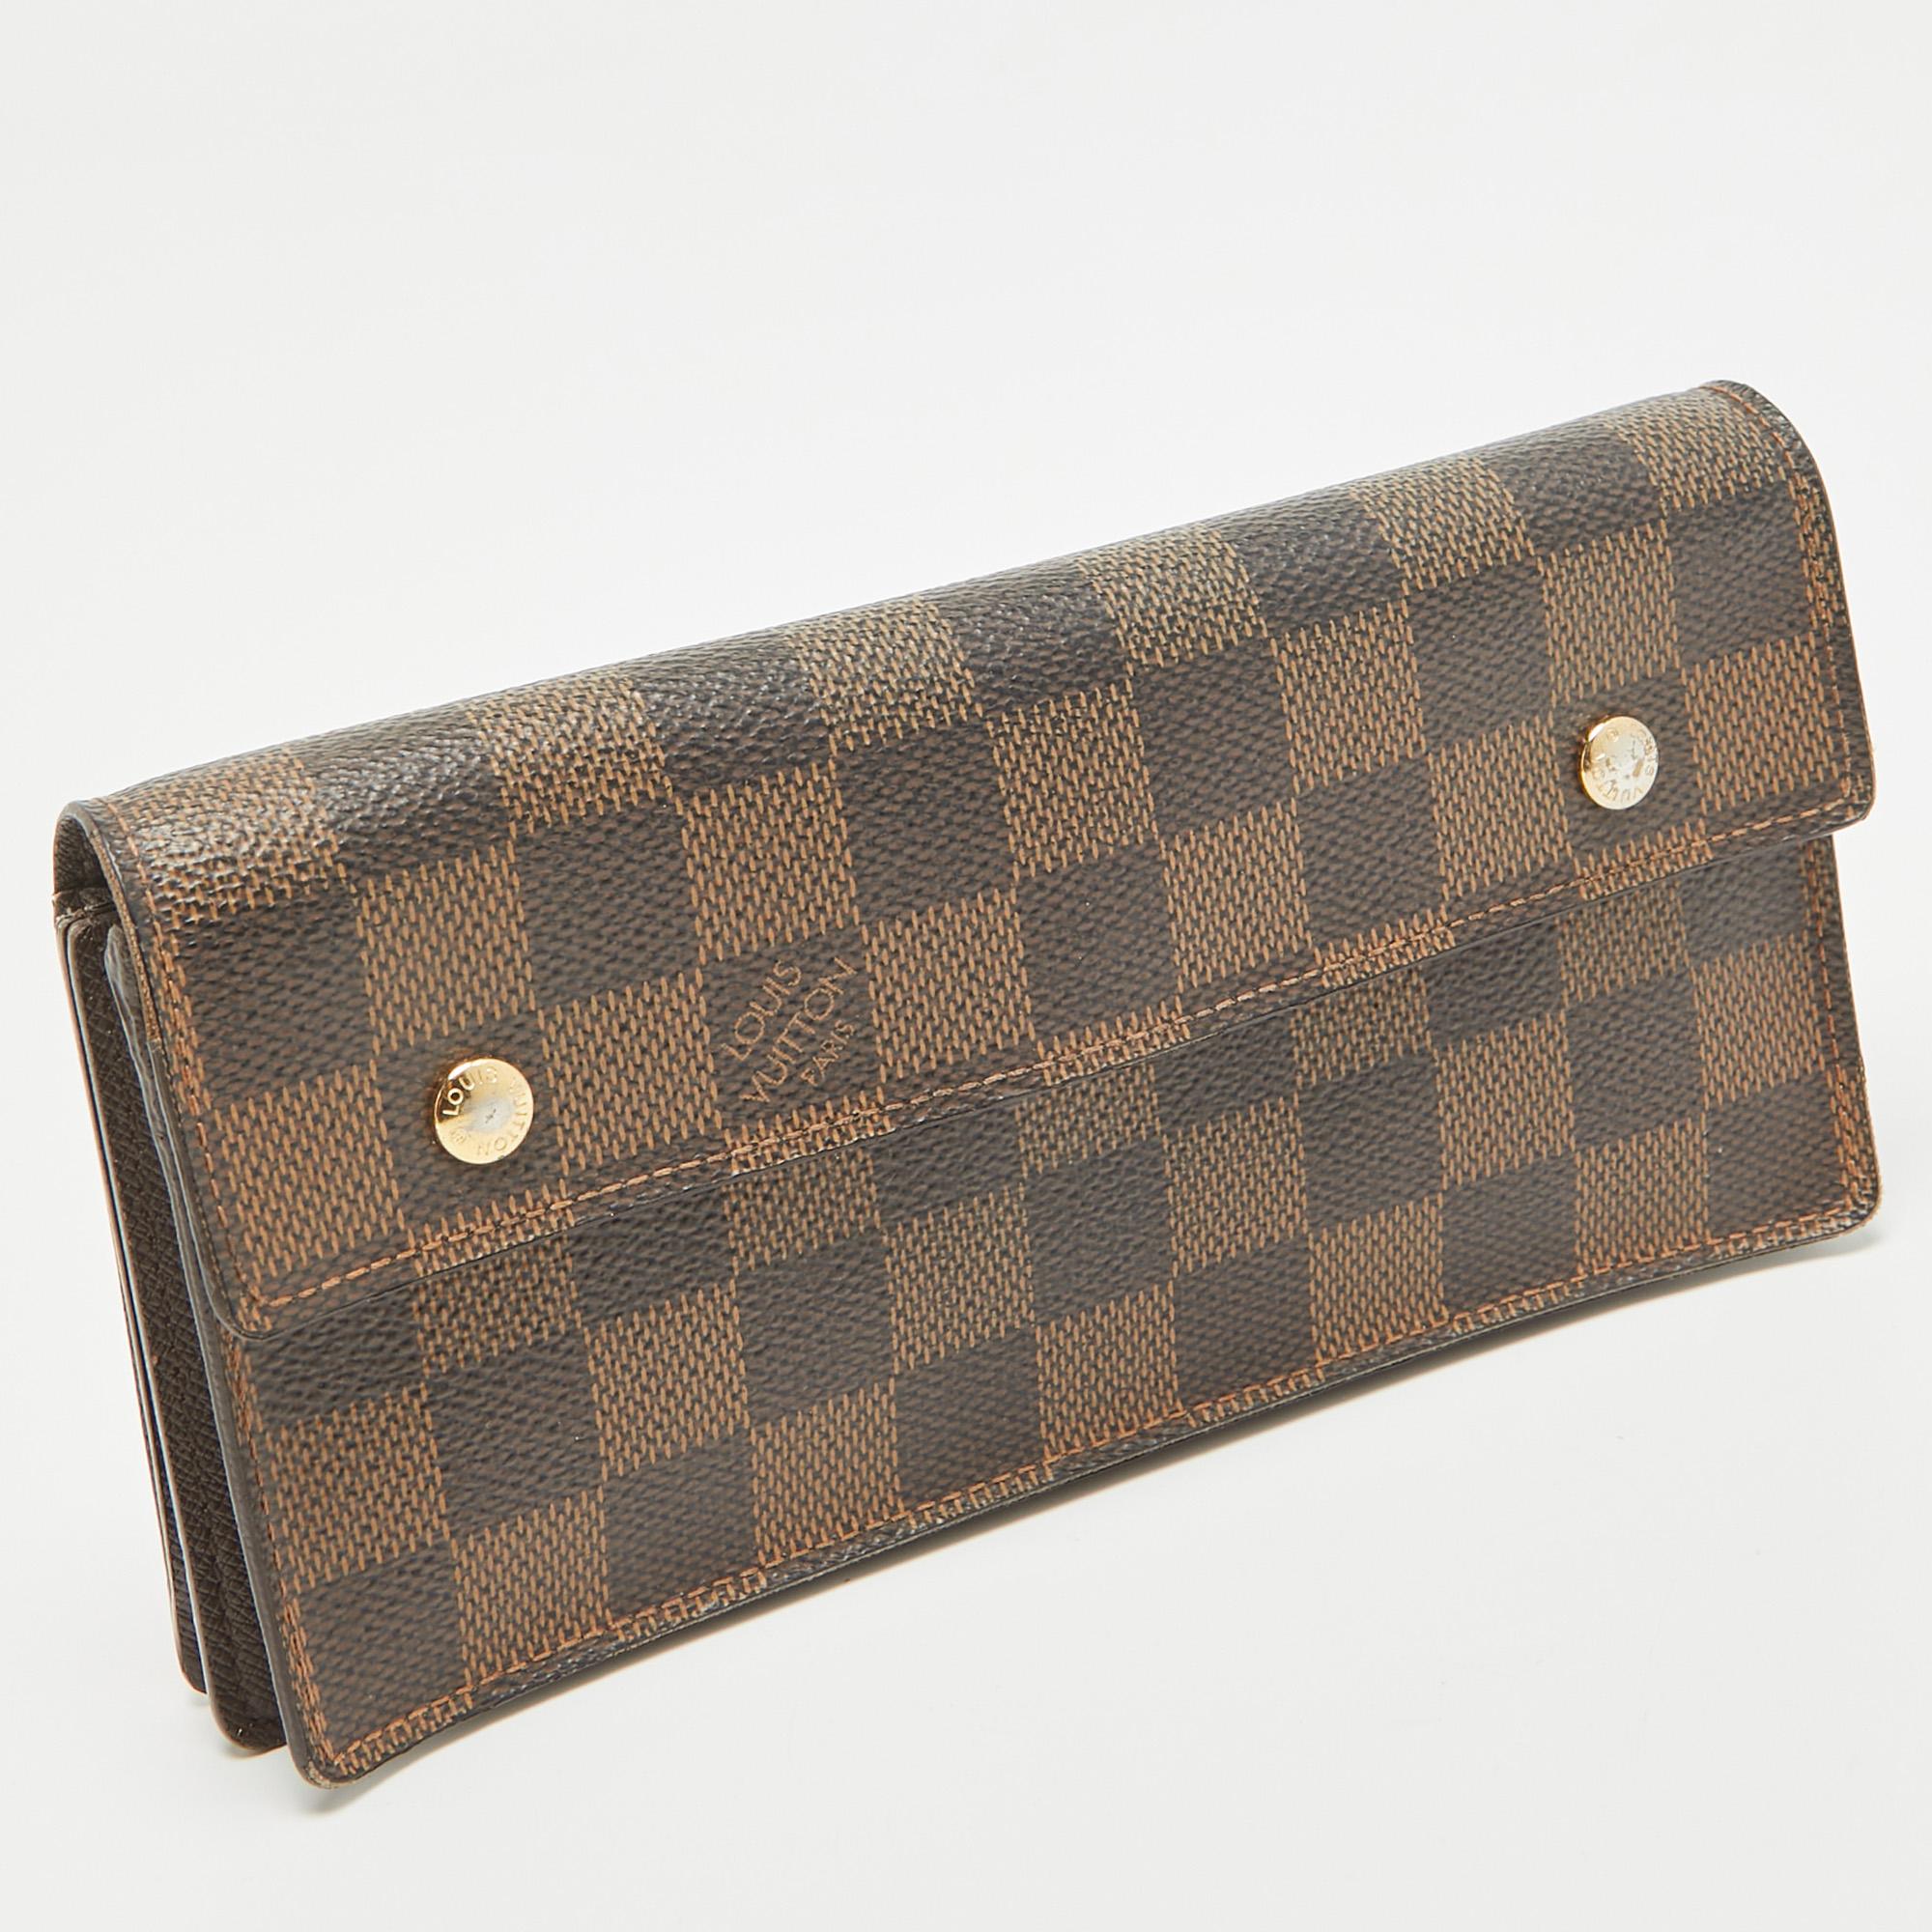 Elevate your everyday elegance with this Louis Vuitton wallet. Meticulously crafted from premium materials, it seamlessly blends style, functionality, and sophistication, making it a great pick.

Includes
Original Dustbag, Original Box